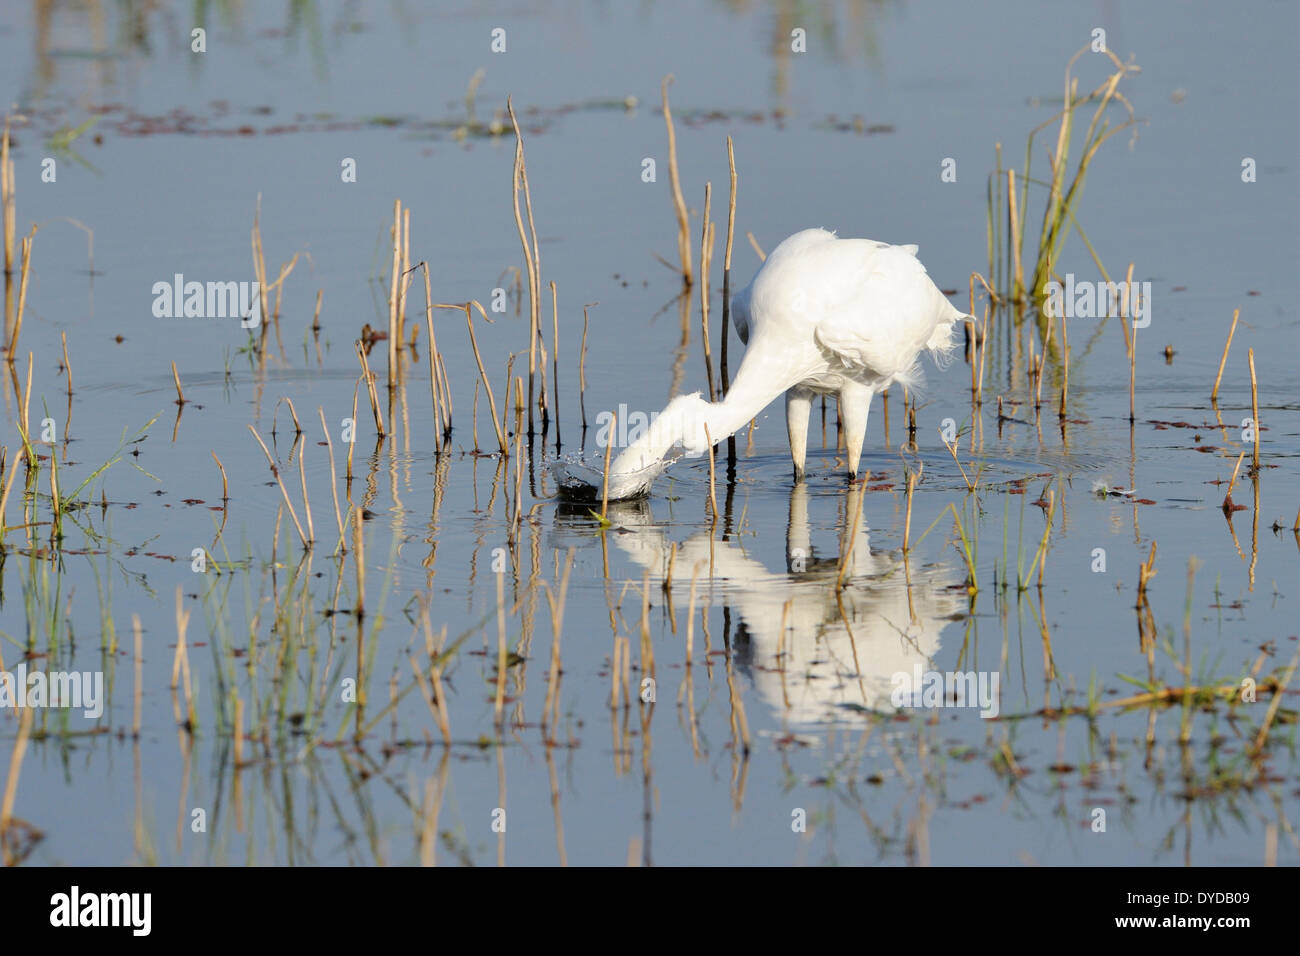 Great egret (Casmerodius albus) foraging in water with reflection. Stock Photo